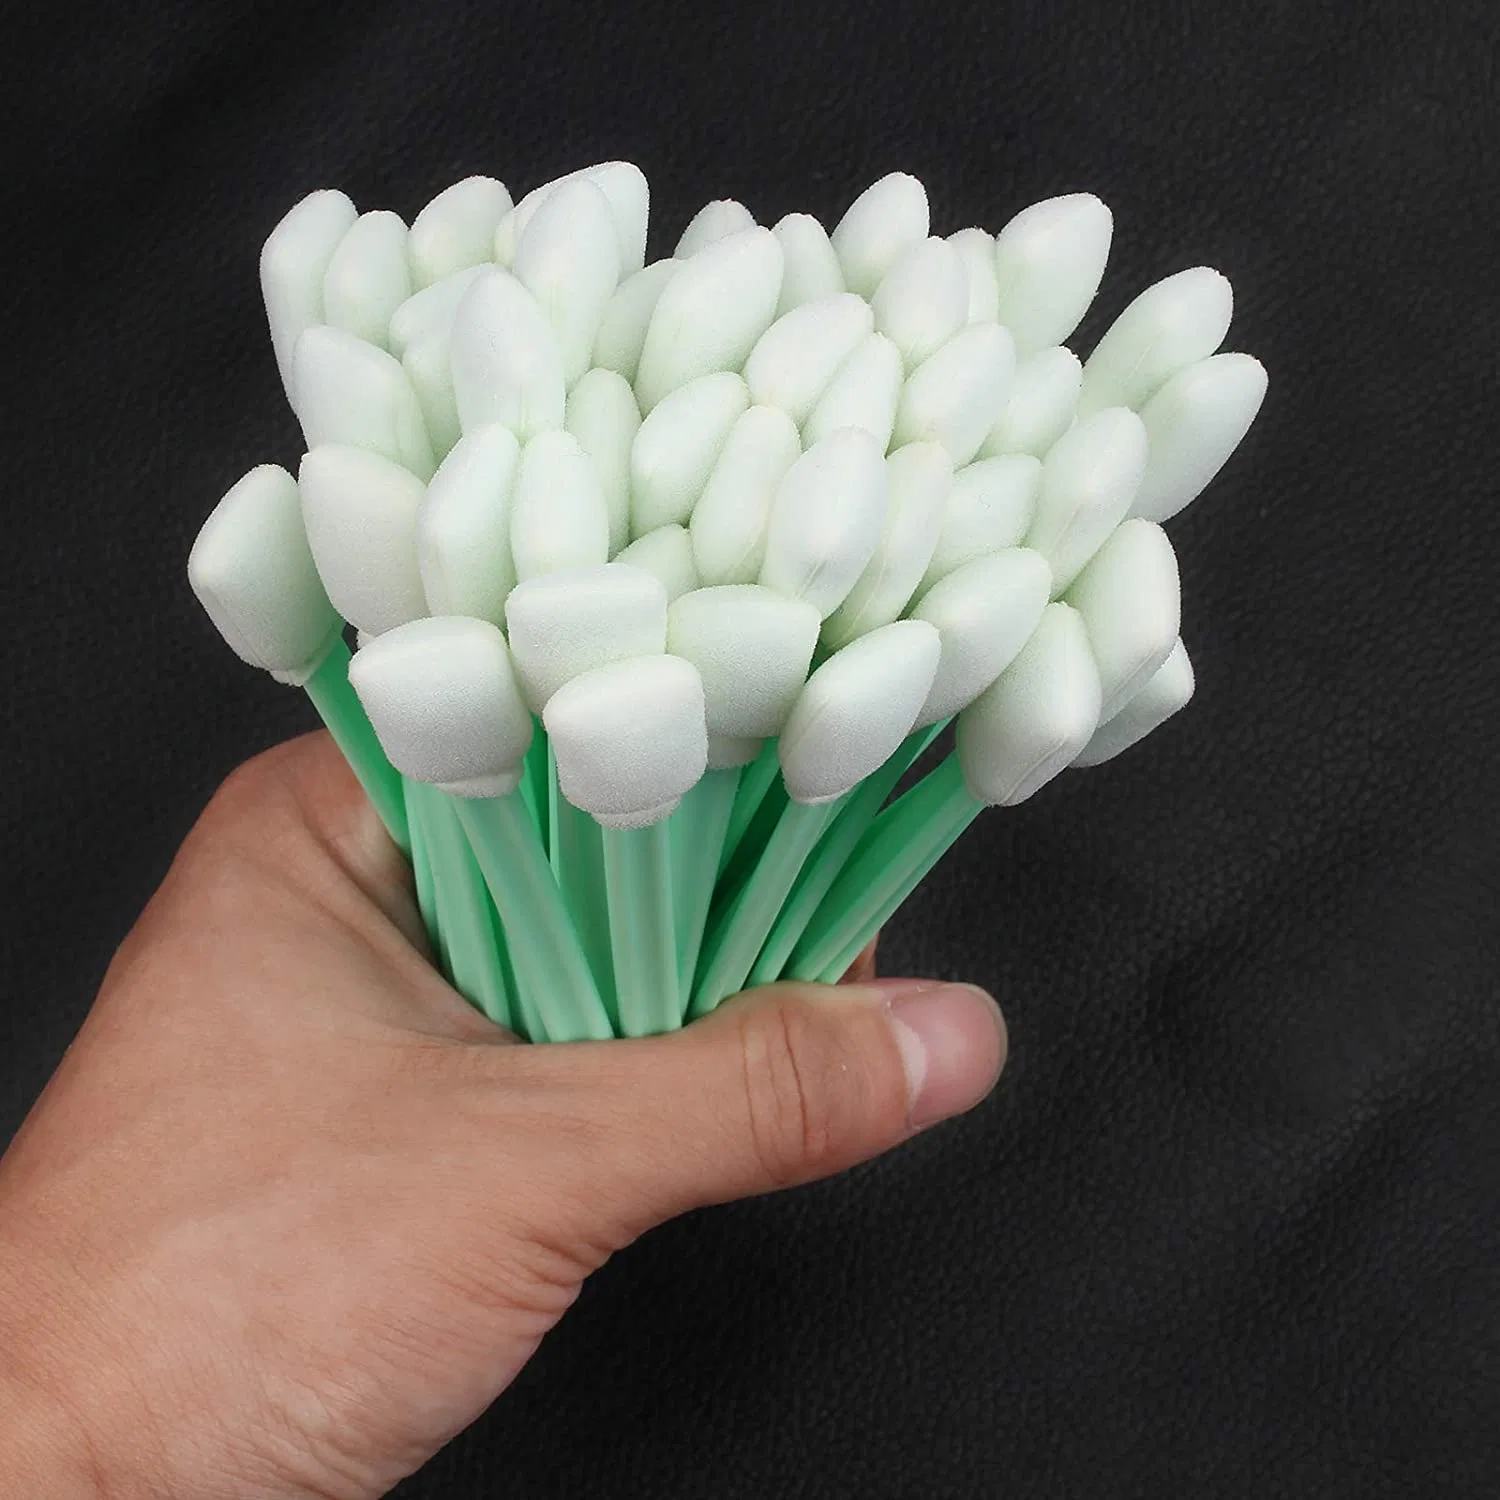 Wholesale/Supplier 100PCS/Pack Bamboo Cotton Buds Cotton Swabs Medical Ear Cleaning Wood Sticks